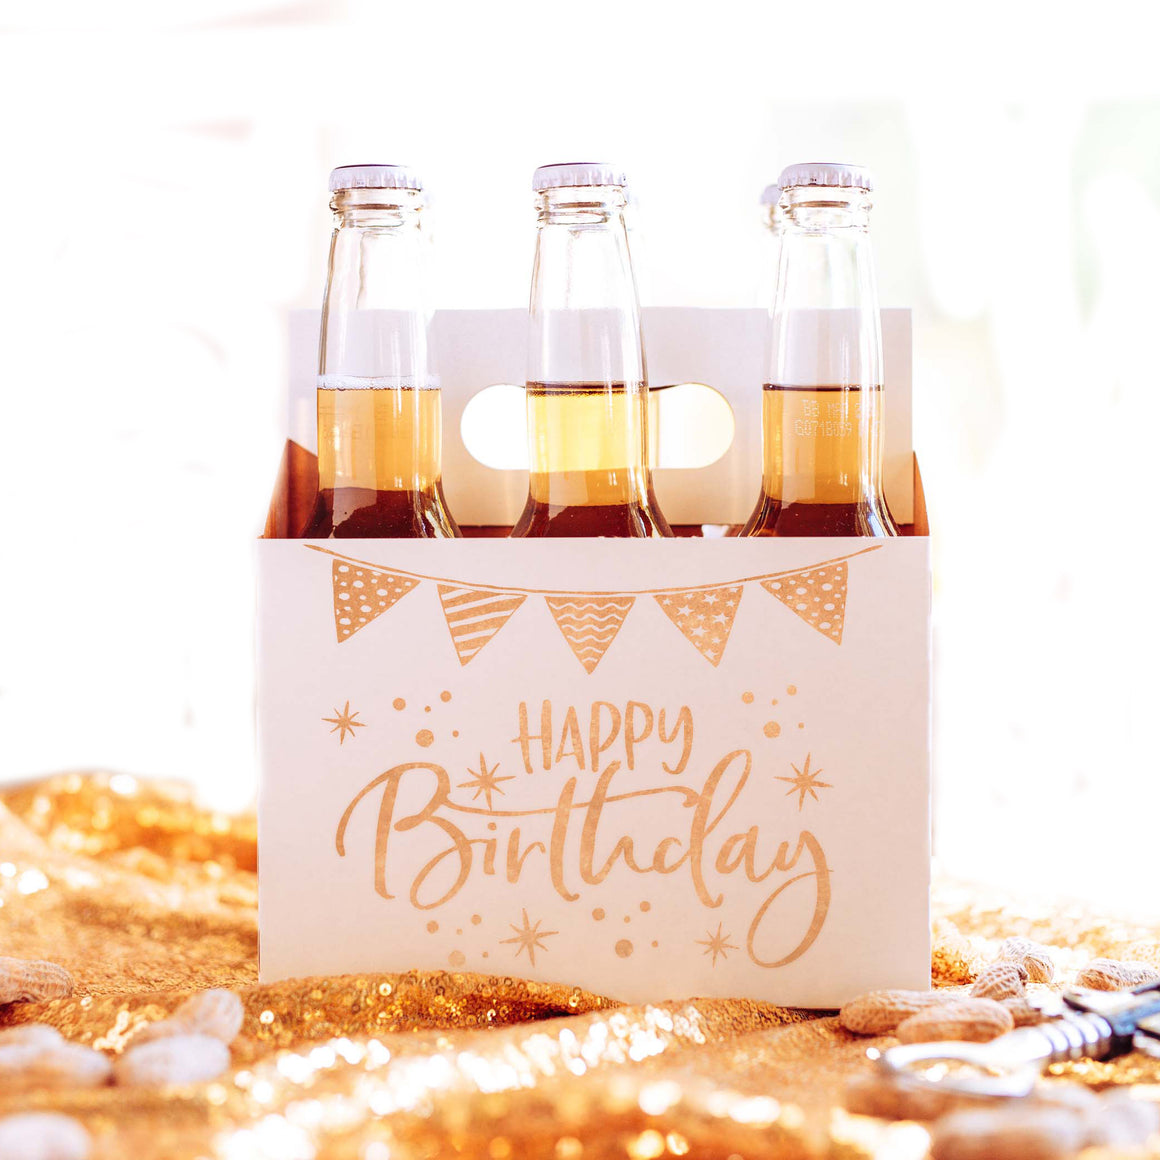 Happy Birthday with a six pack of beer for gift